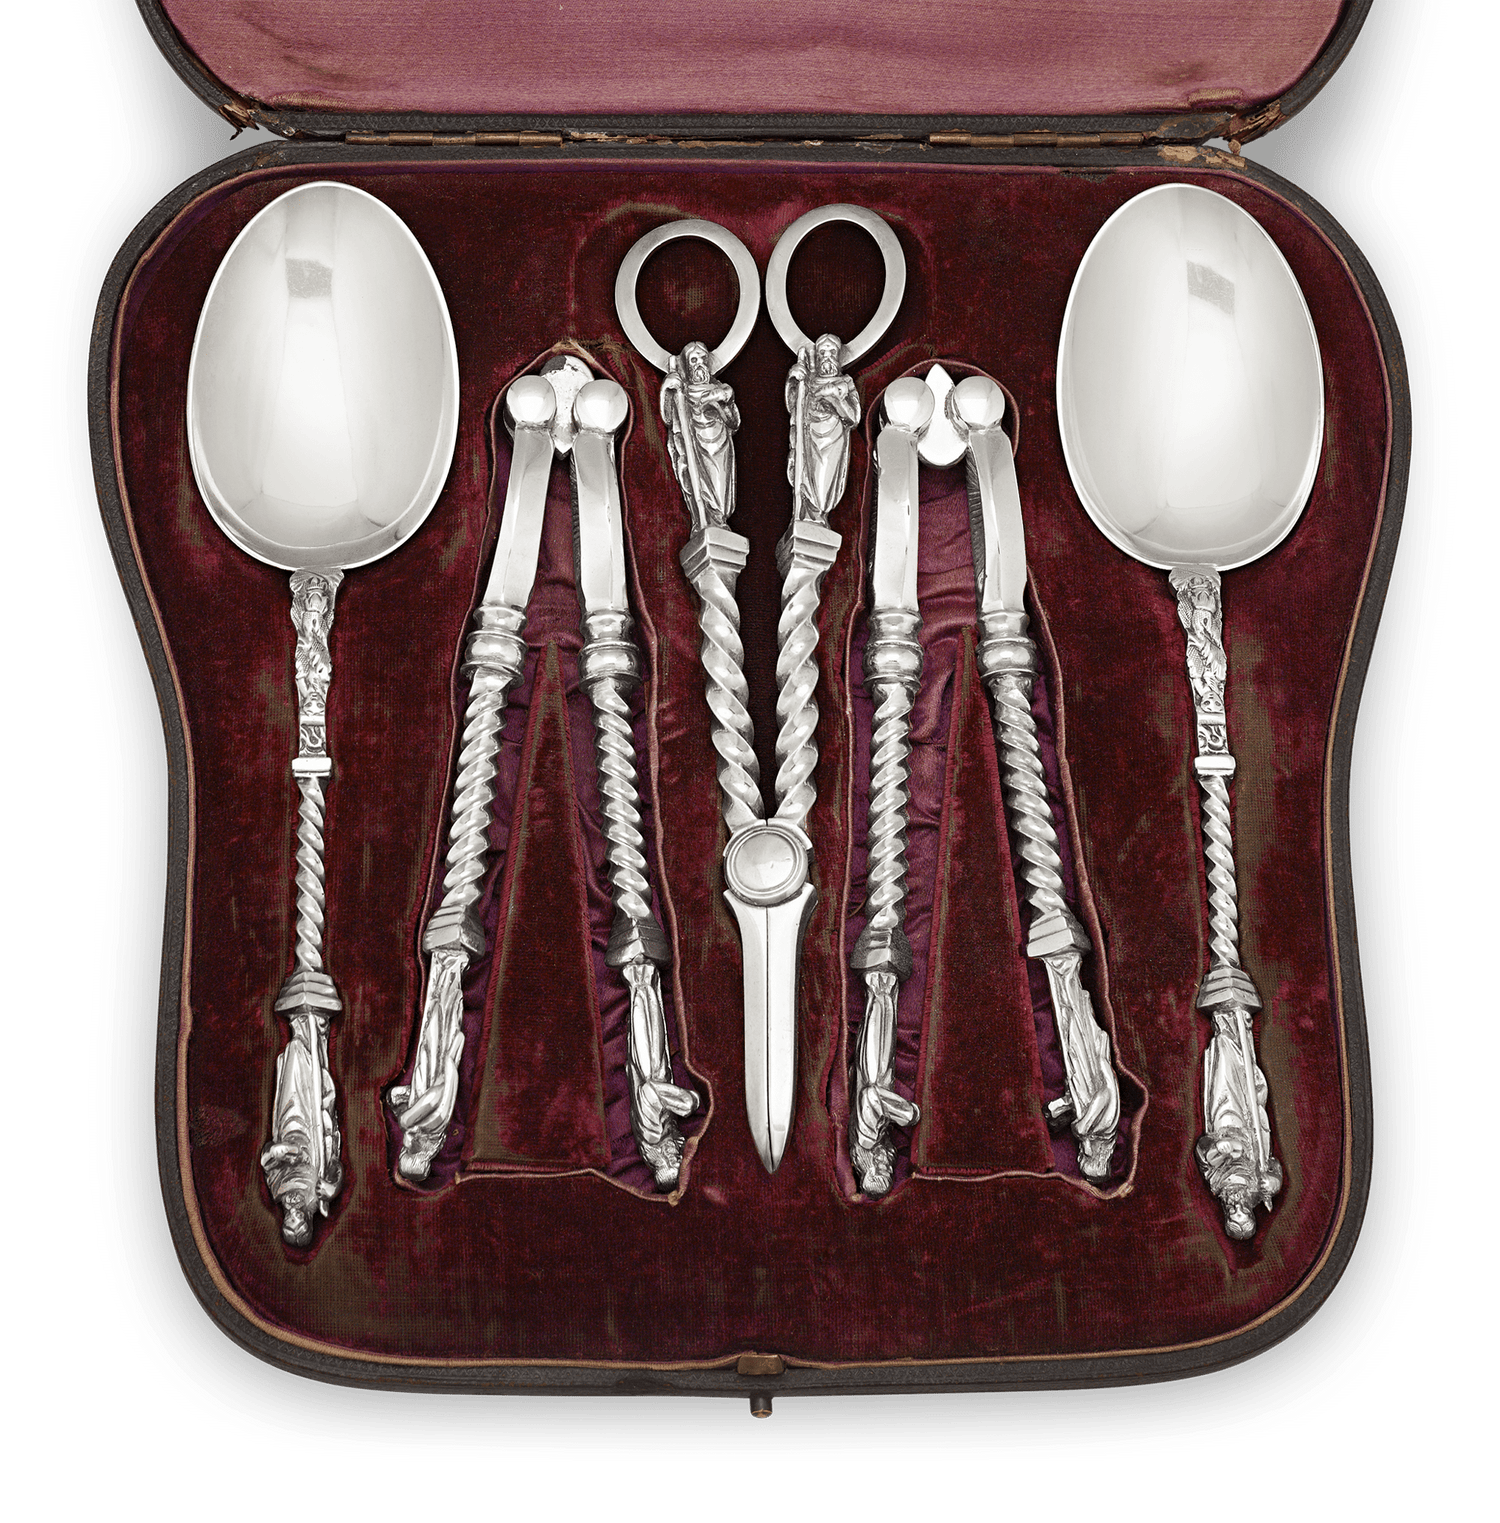 Apostle Silver Spoon Set with Nutcracker by Brook & Son